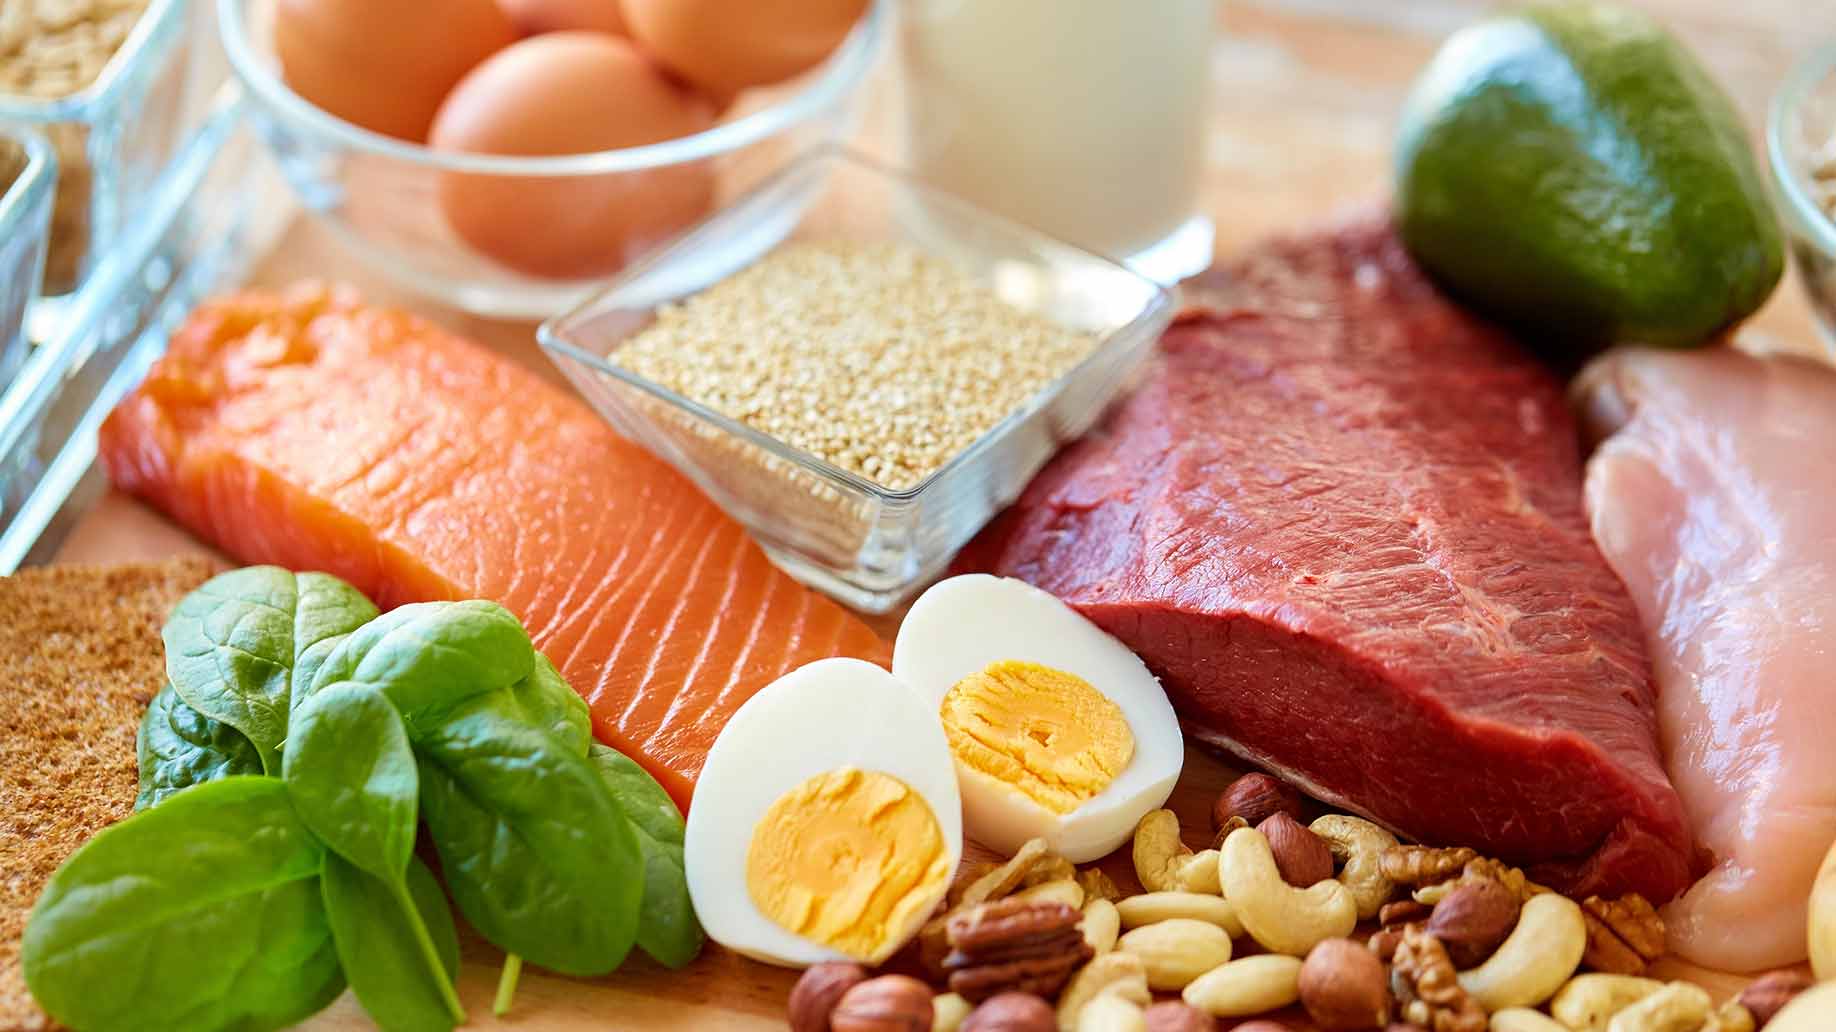 tyrosine meat eggs nuts boost increase energy levels natural remedies